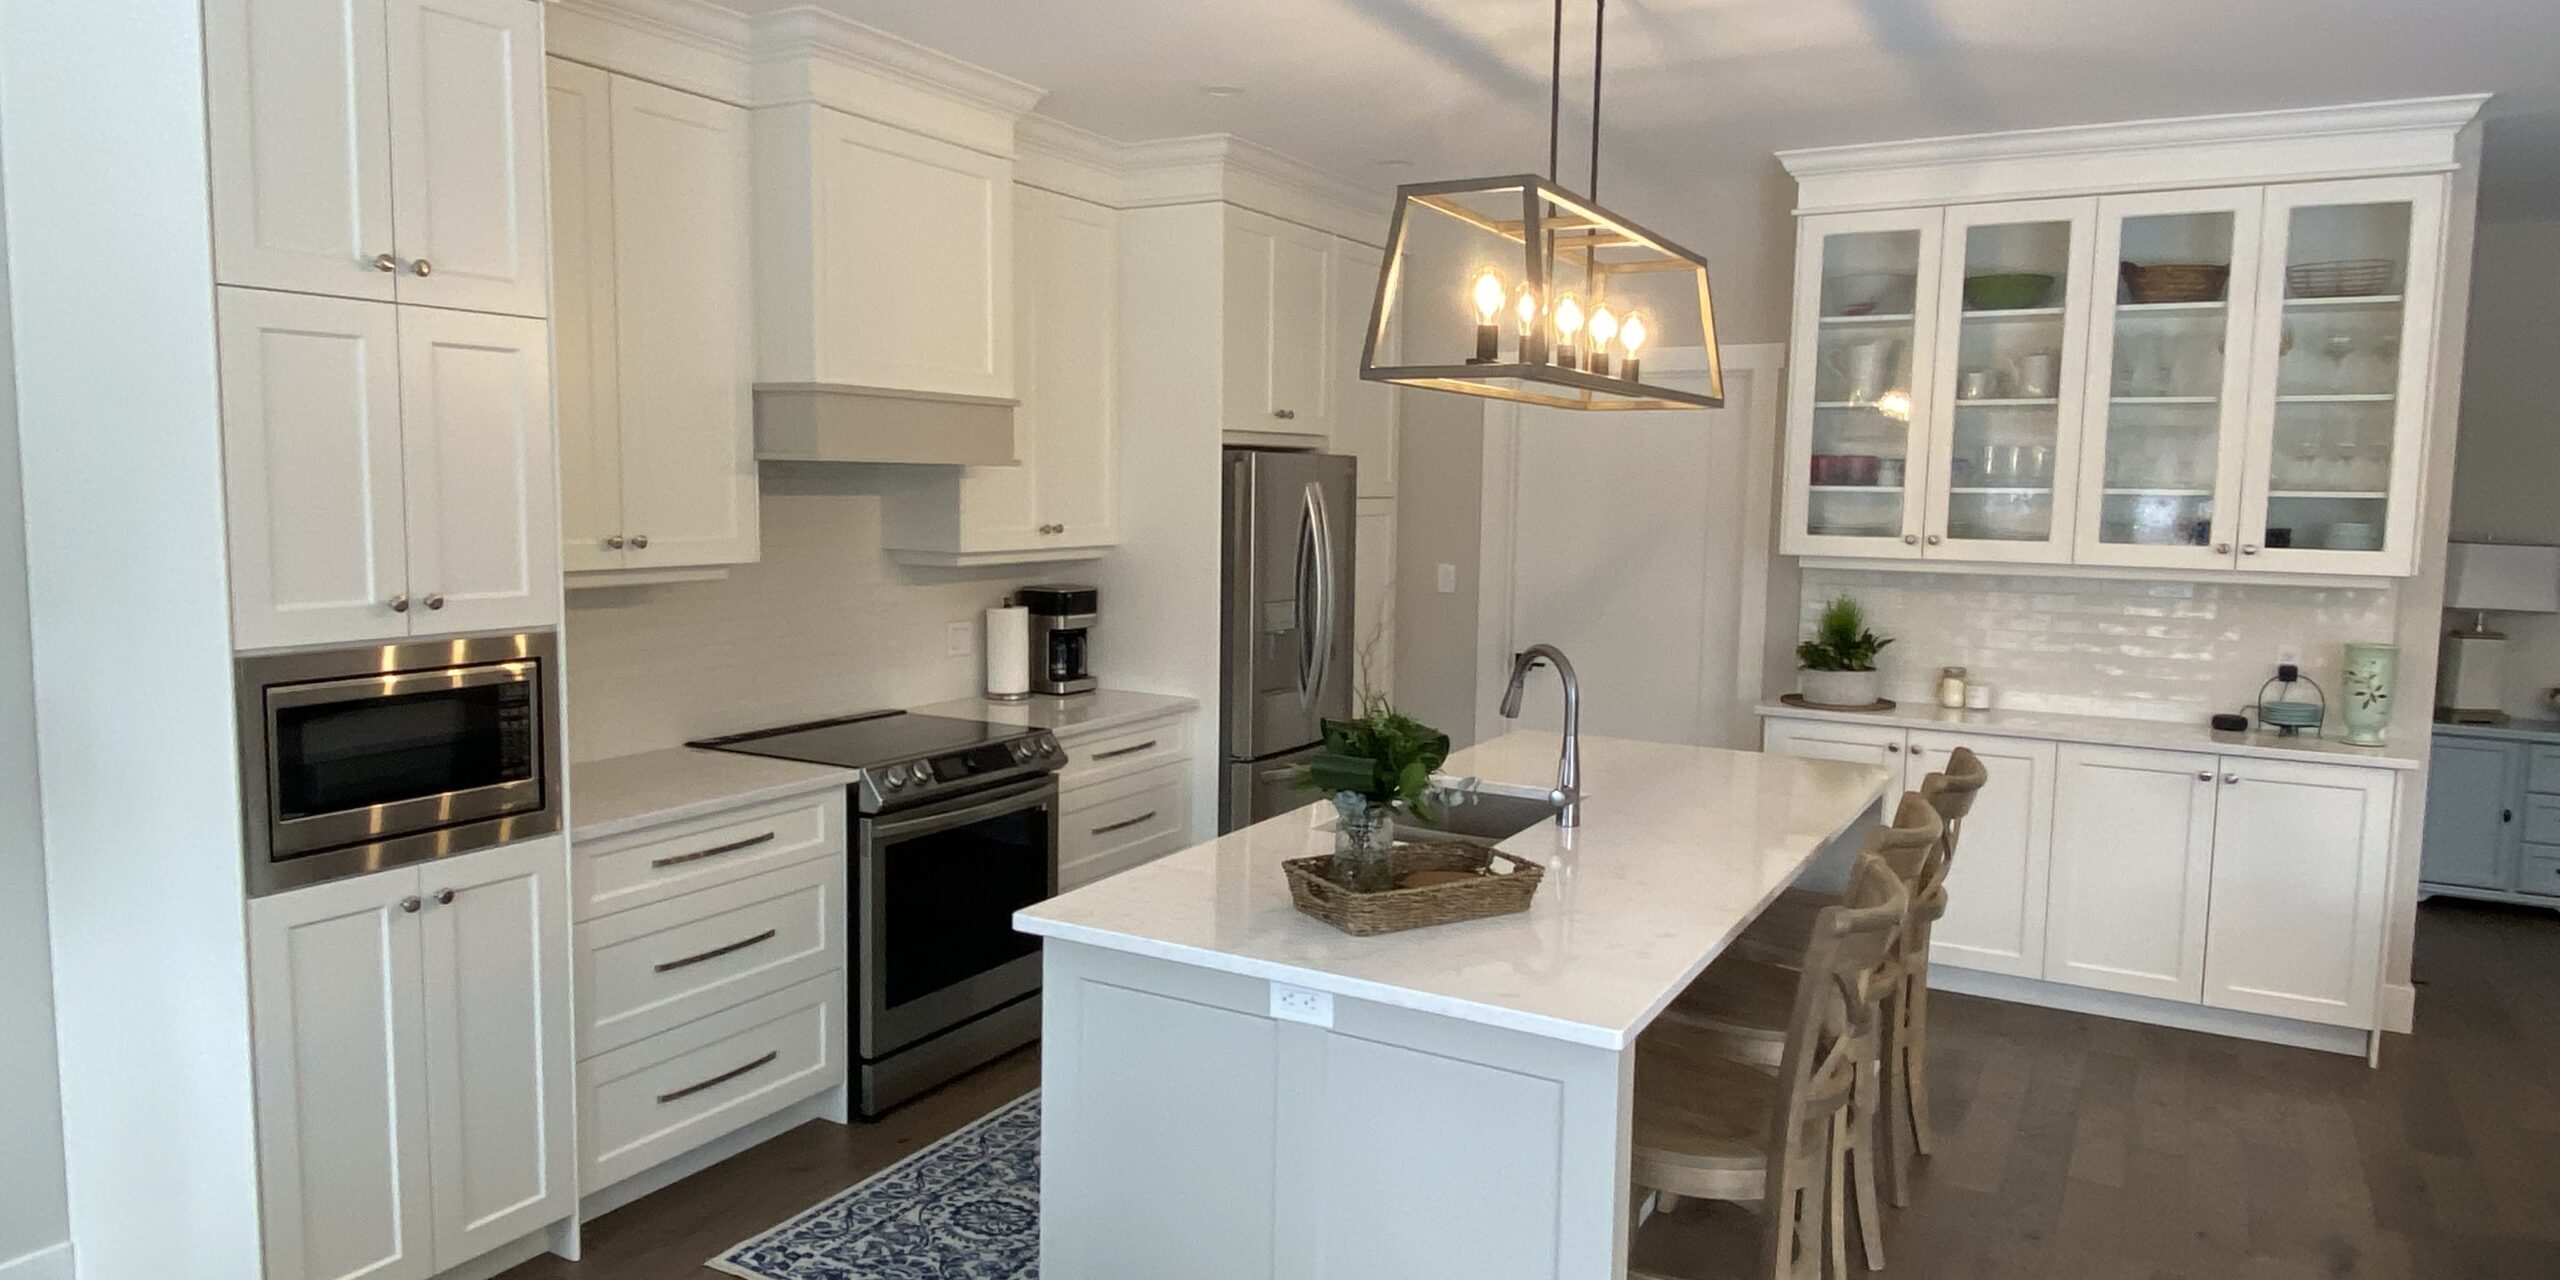 White Kitchen and Island Cabinets